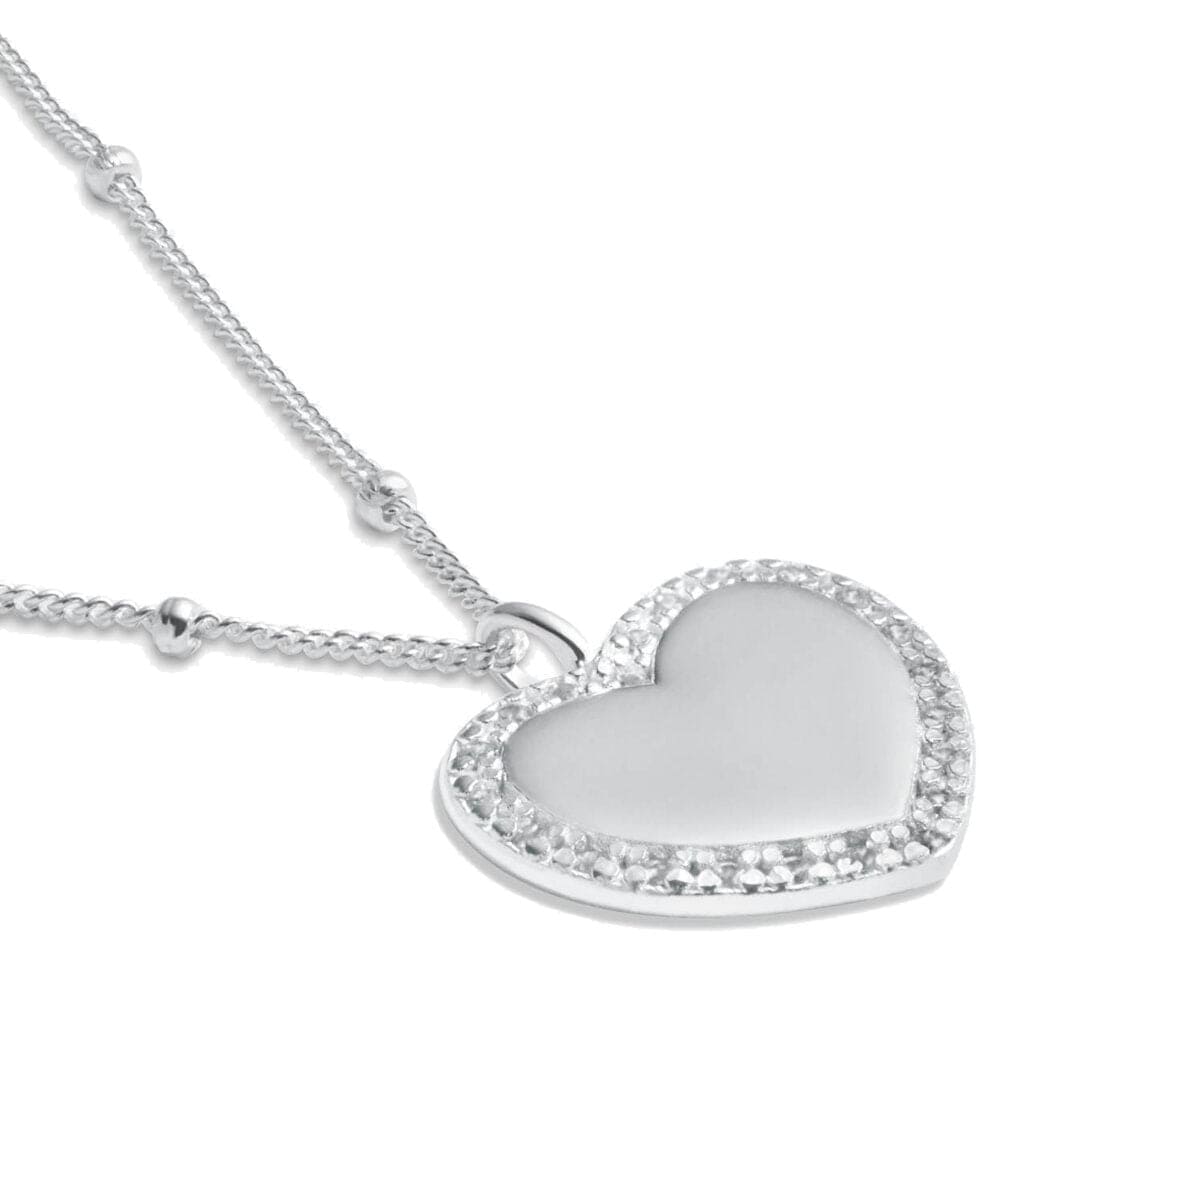 Joma Jewellery Necklace Joma Jewellery Sterling Silver Necklace - I Love You